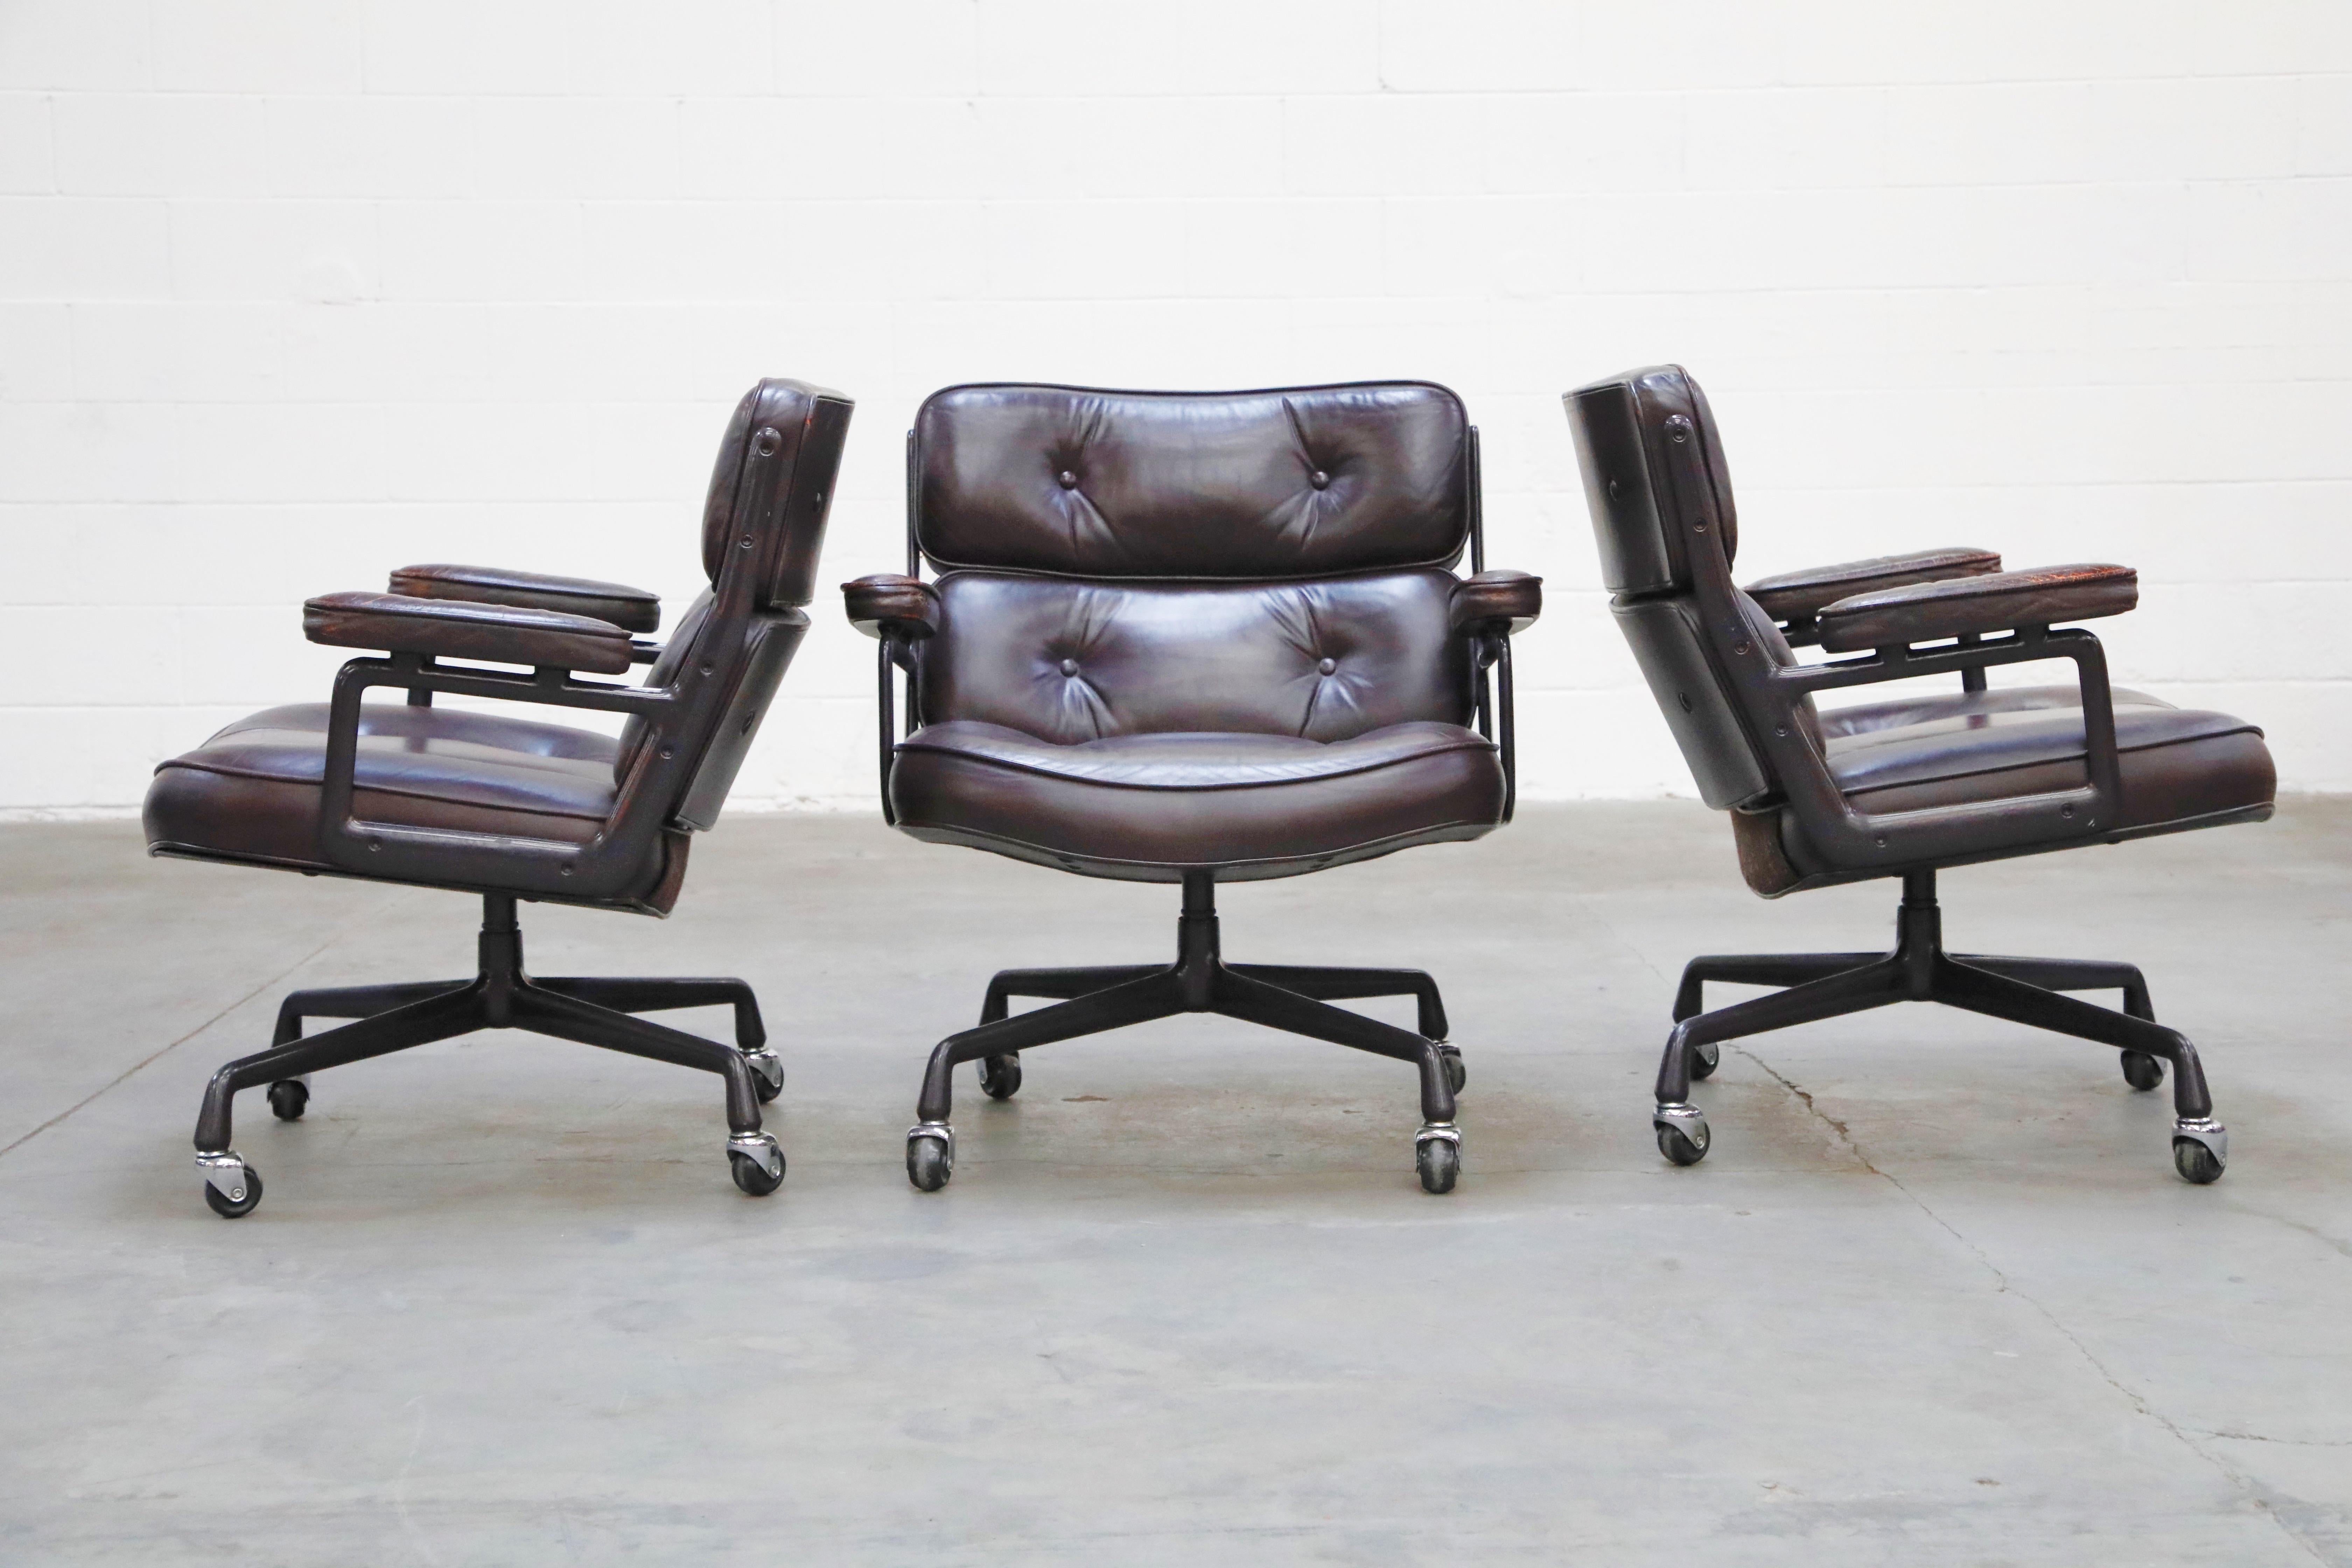 Attention collectors and interior designers looking for the absolute best example of a Time Life chair for you or your client, read more below to find out why these are the perfect examples for the discriminating collector client. Designed by